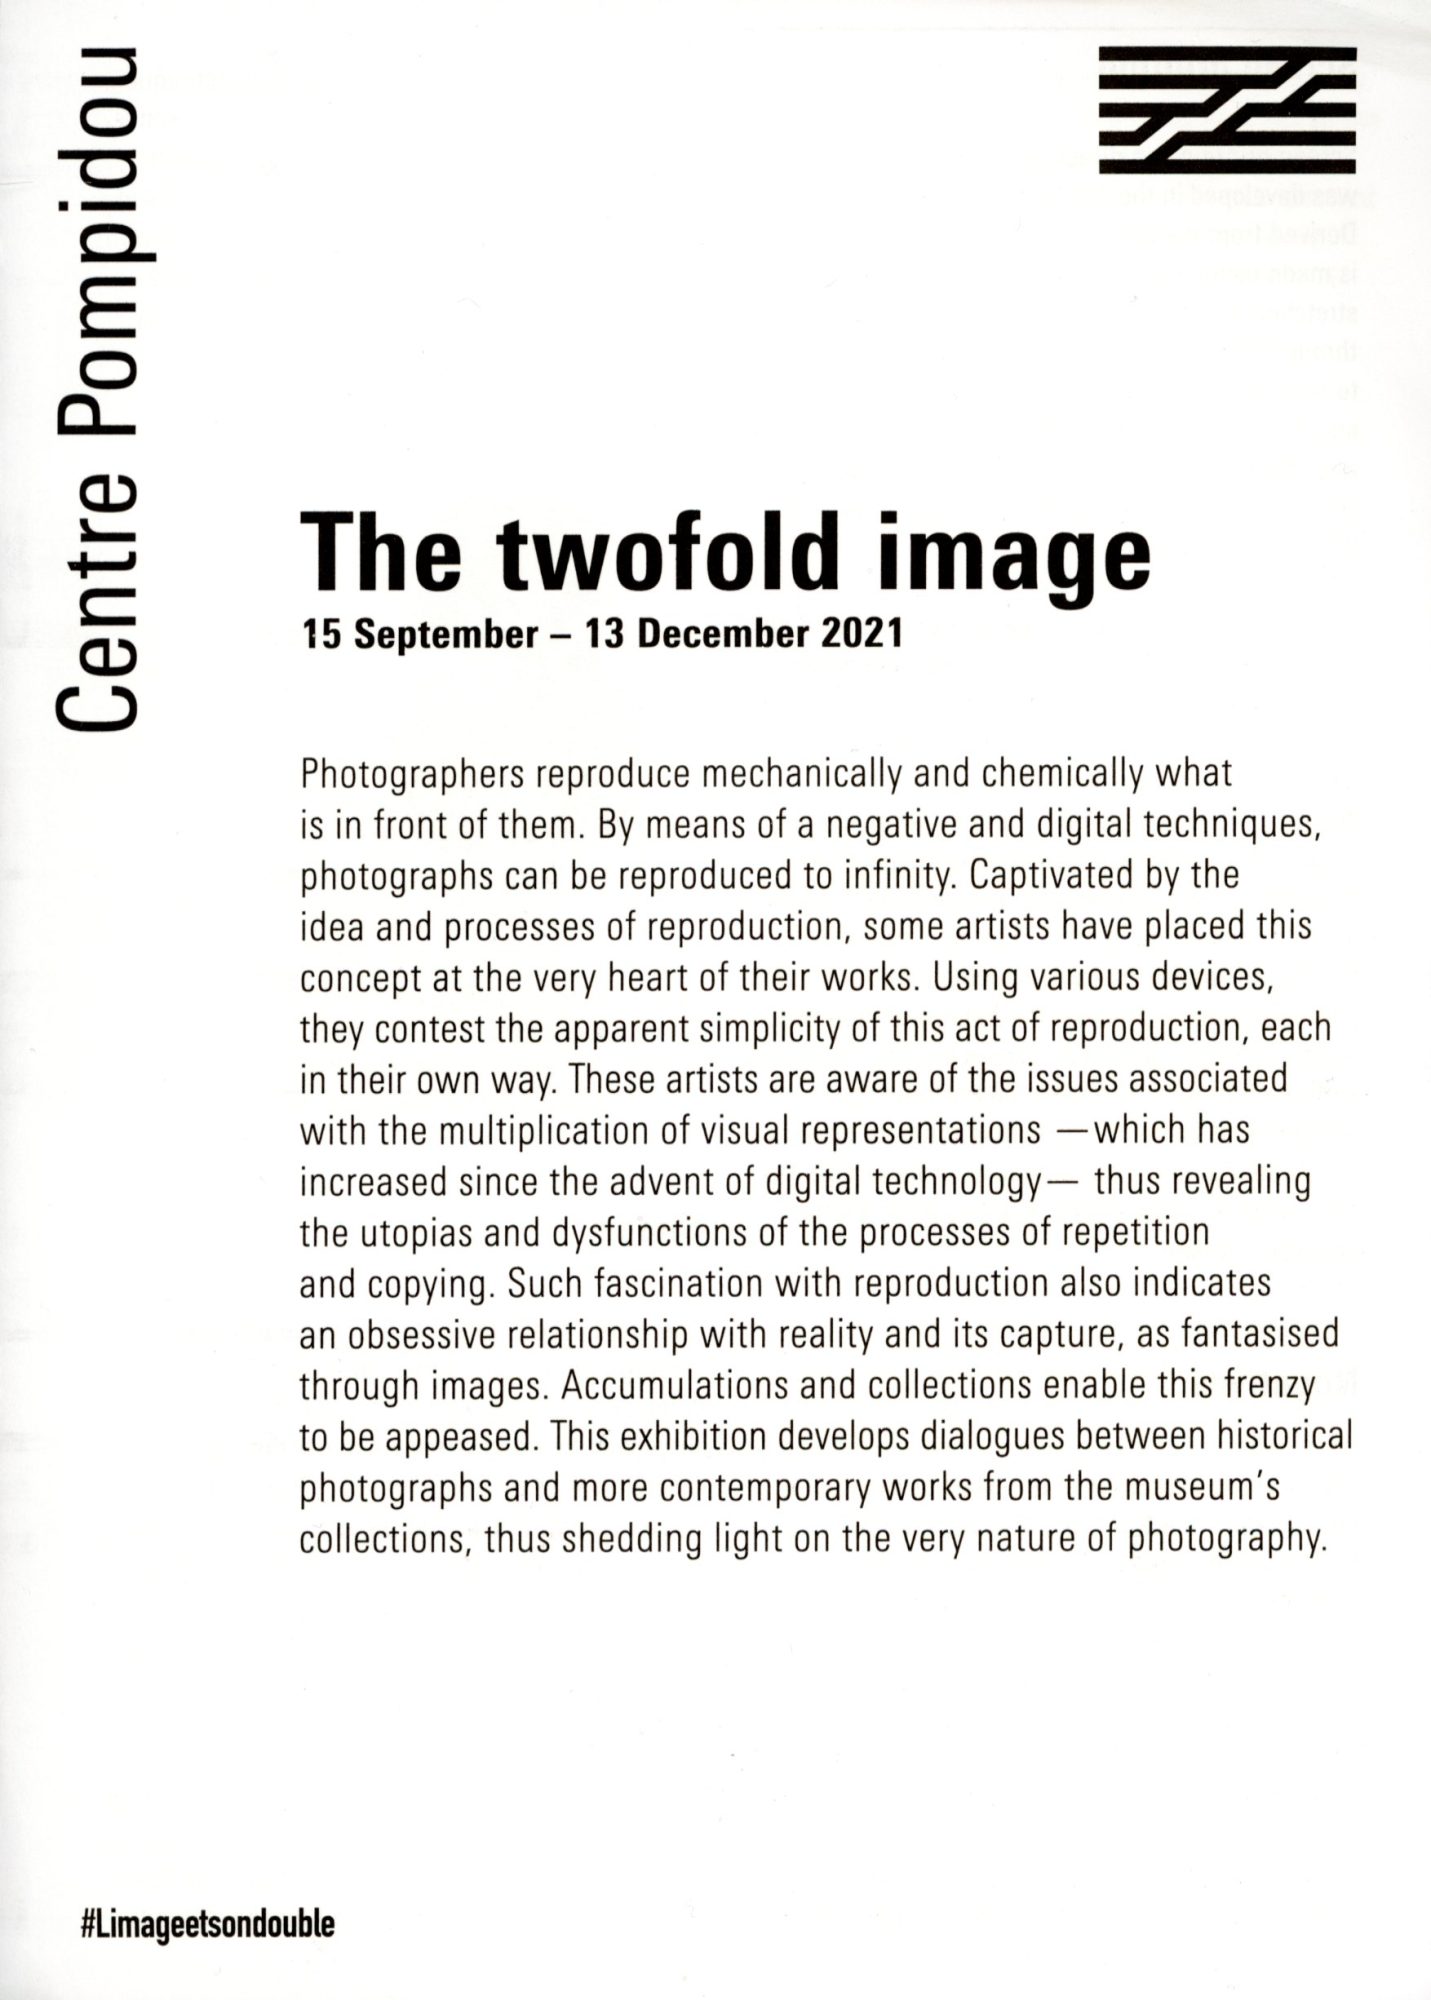 The twofold image, Centre Pompidou